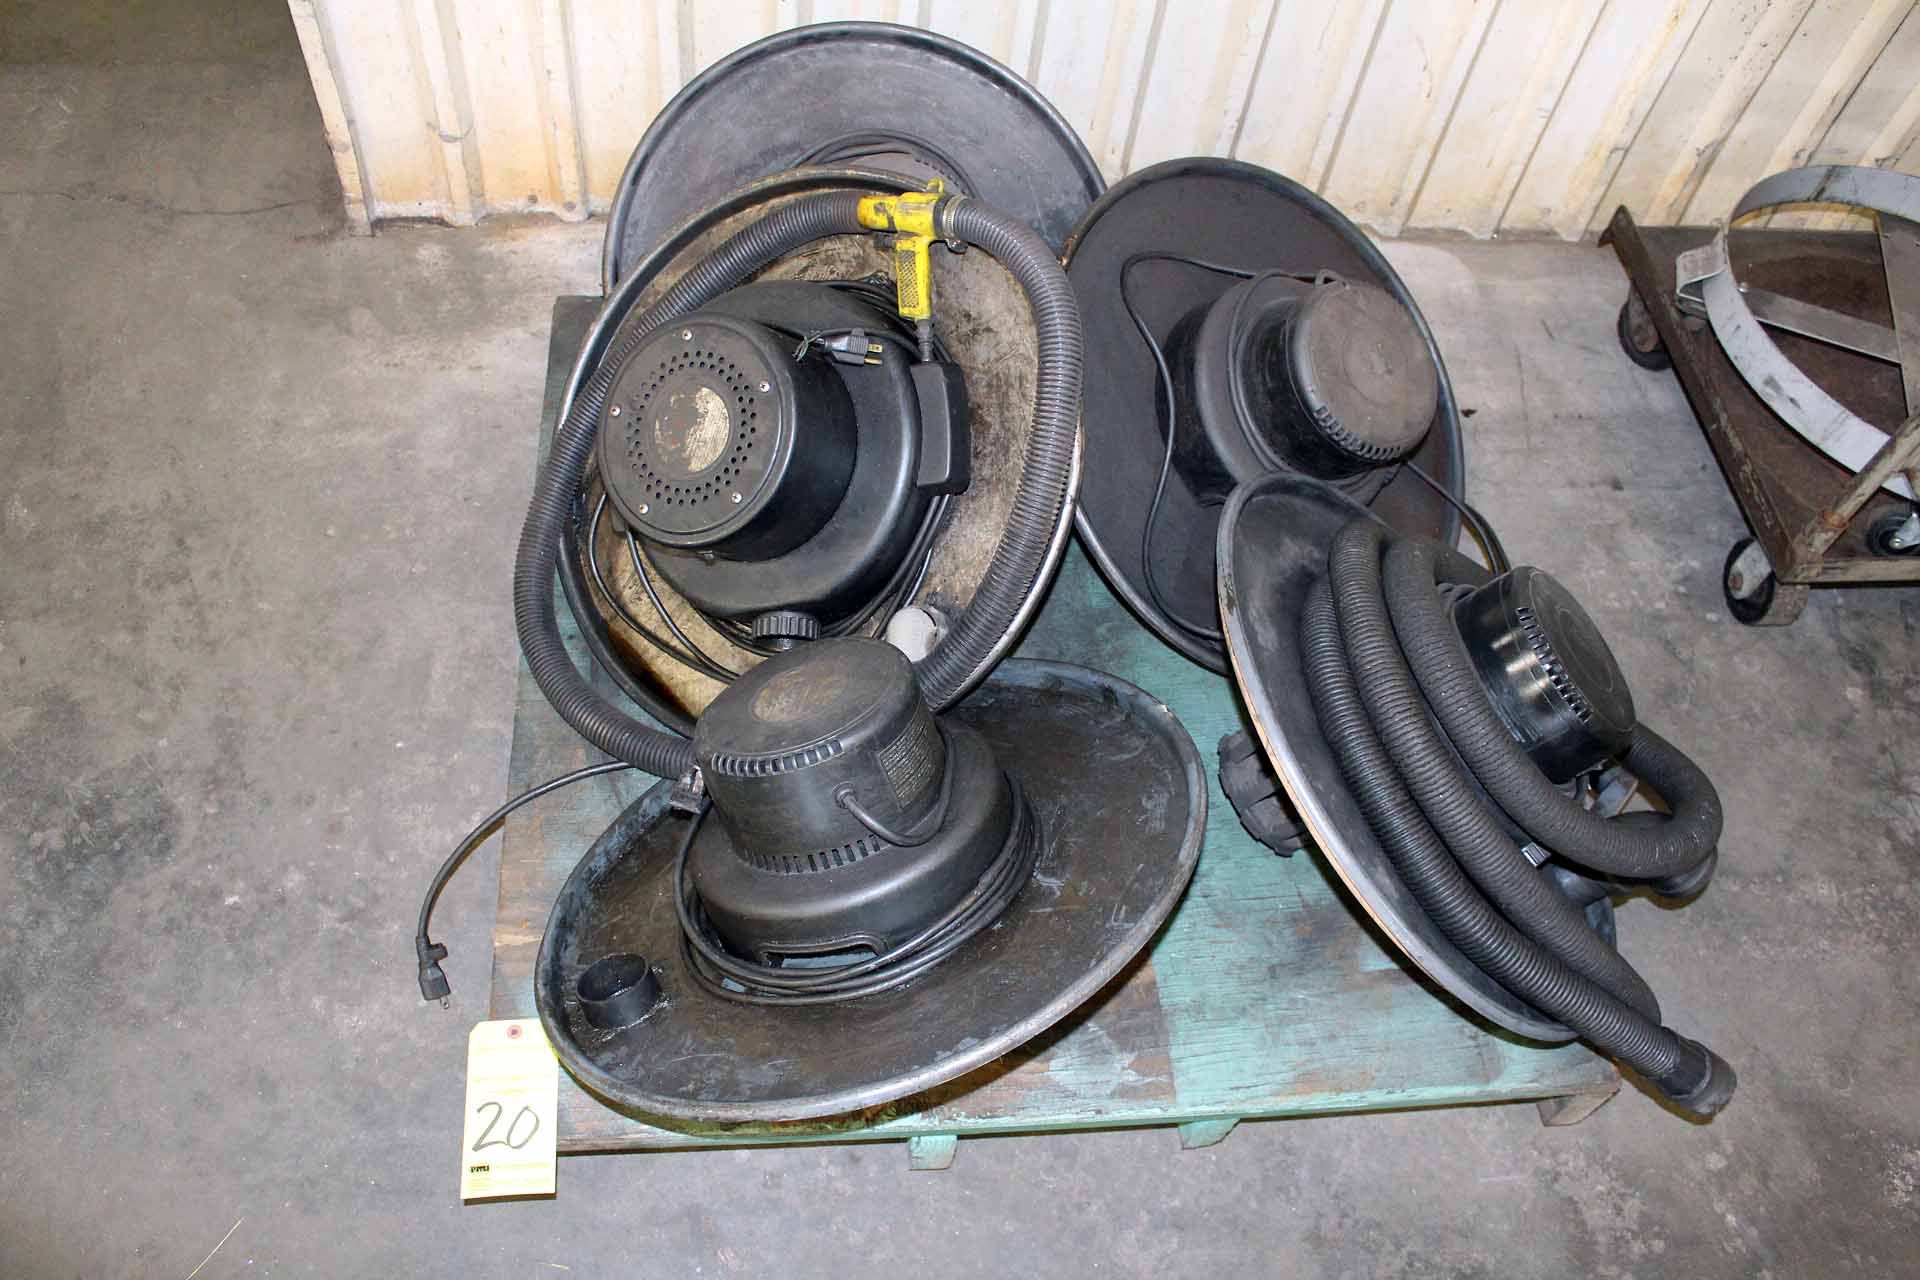 LOT CONSISTING OF: drum mount shop vac heads & PC's (5) (on one skid)